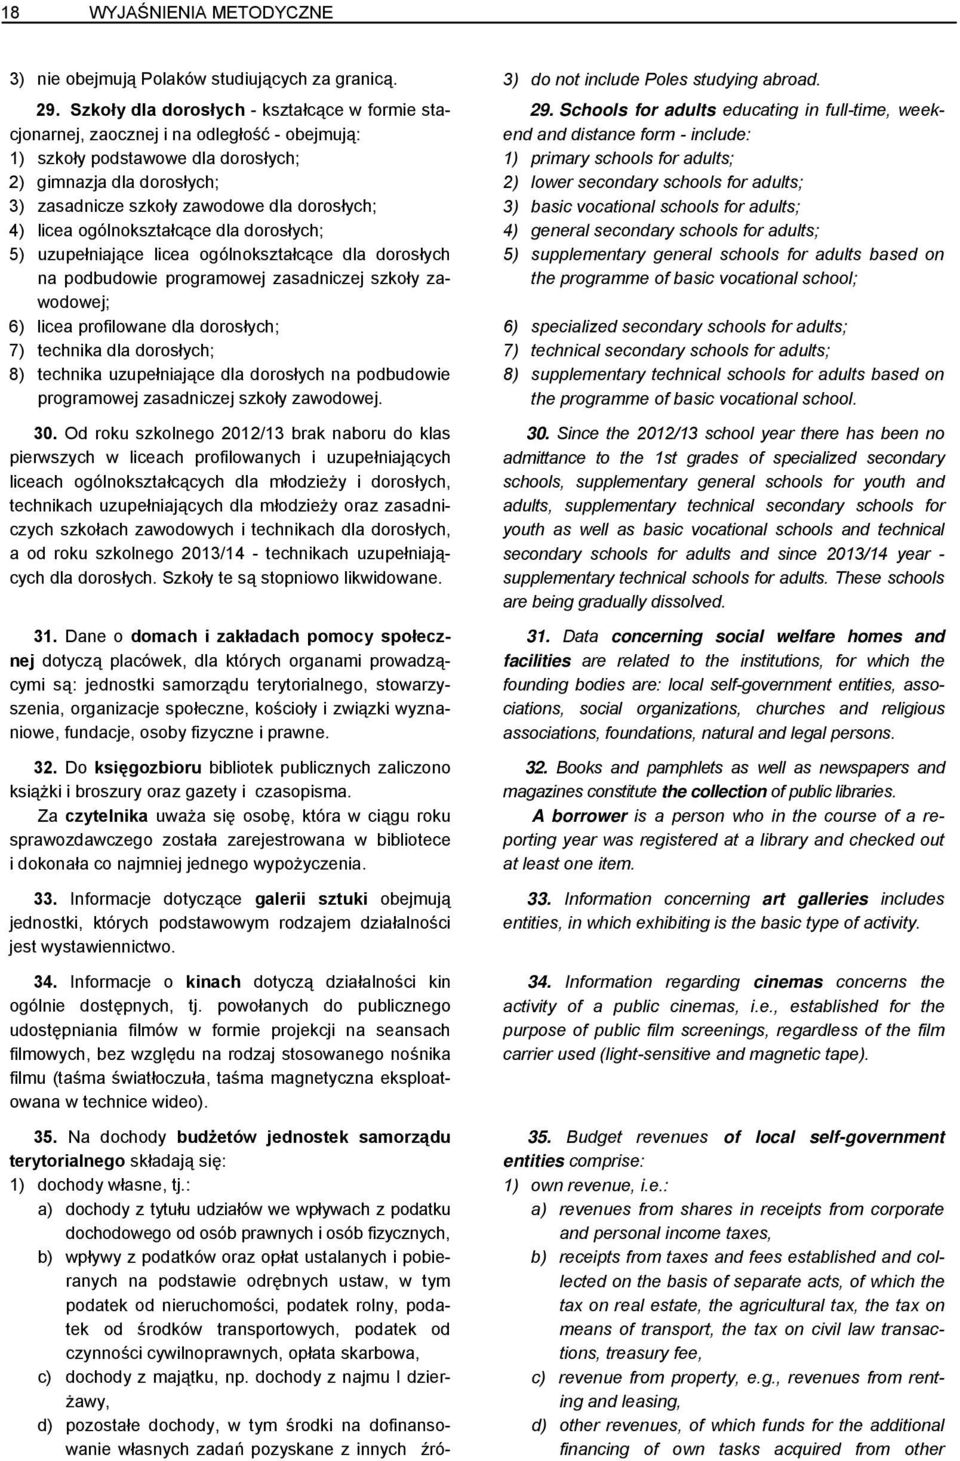 Schools for adults educating in full-time, weekend and distance form - include: 1) szkoły podstawowe dla dorosłych; 1) primary schools for adults; 2) gimnazja dla dorosłych; 2) lower secondary